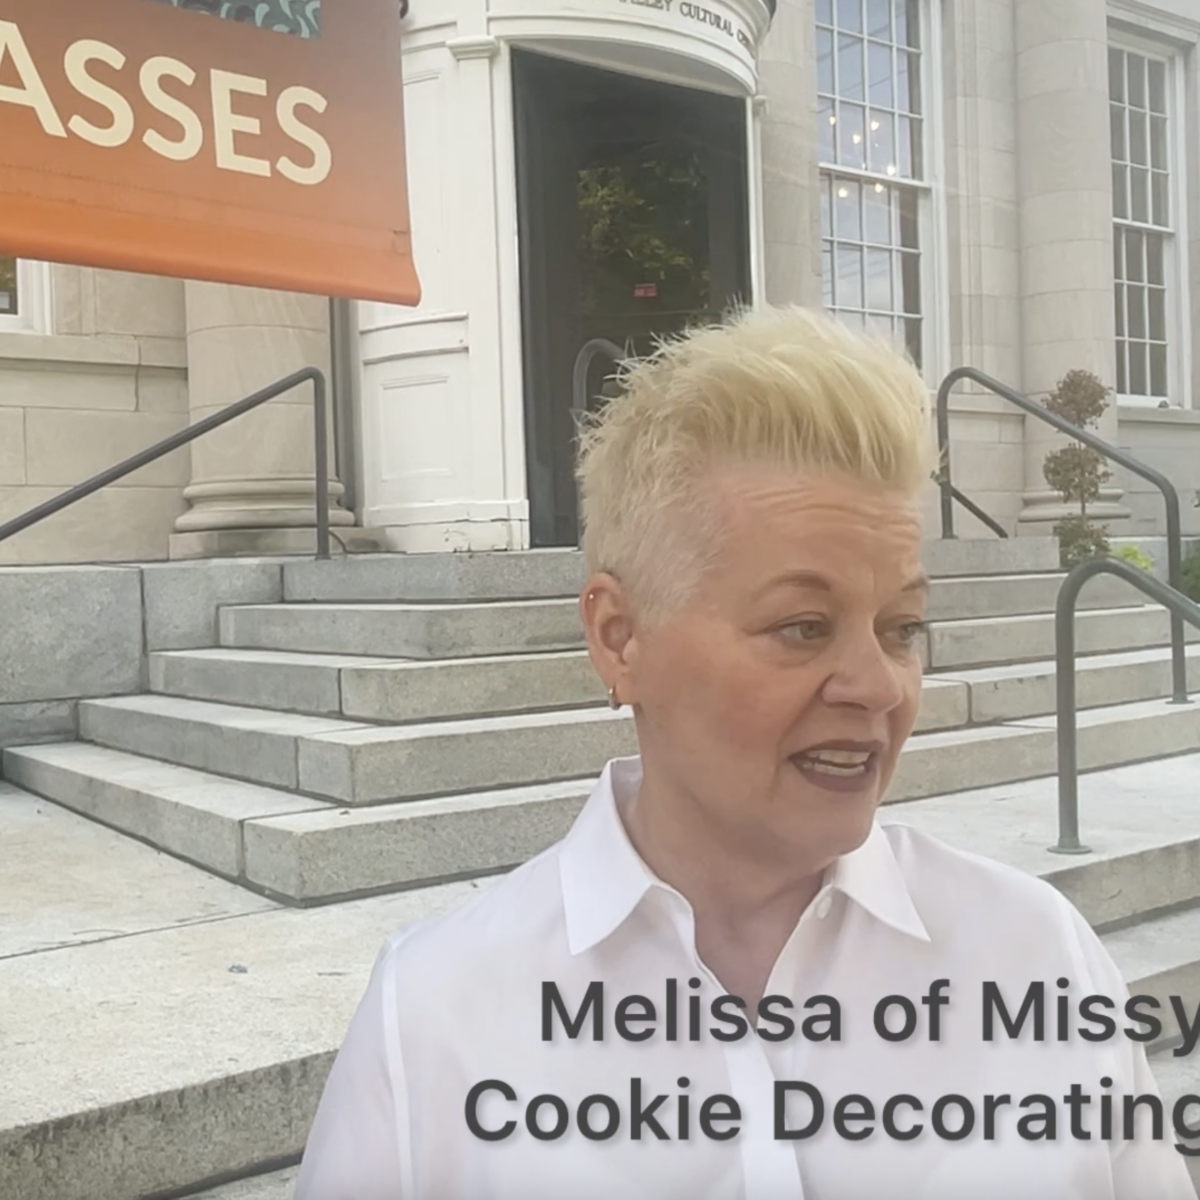 Missy from Missy's Morsels, a woman with bleach blonde short hair wearing a white button down shirt in front of the Sweetwater Center for the Arts entrance